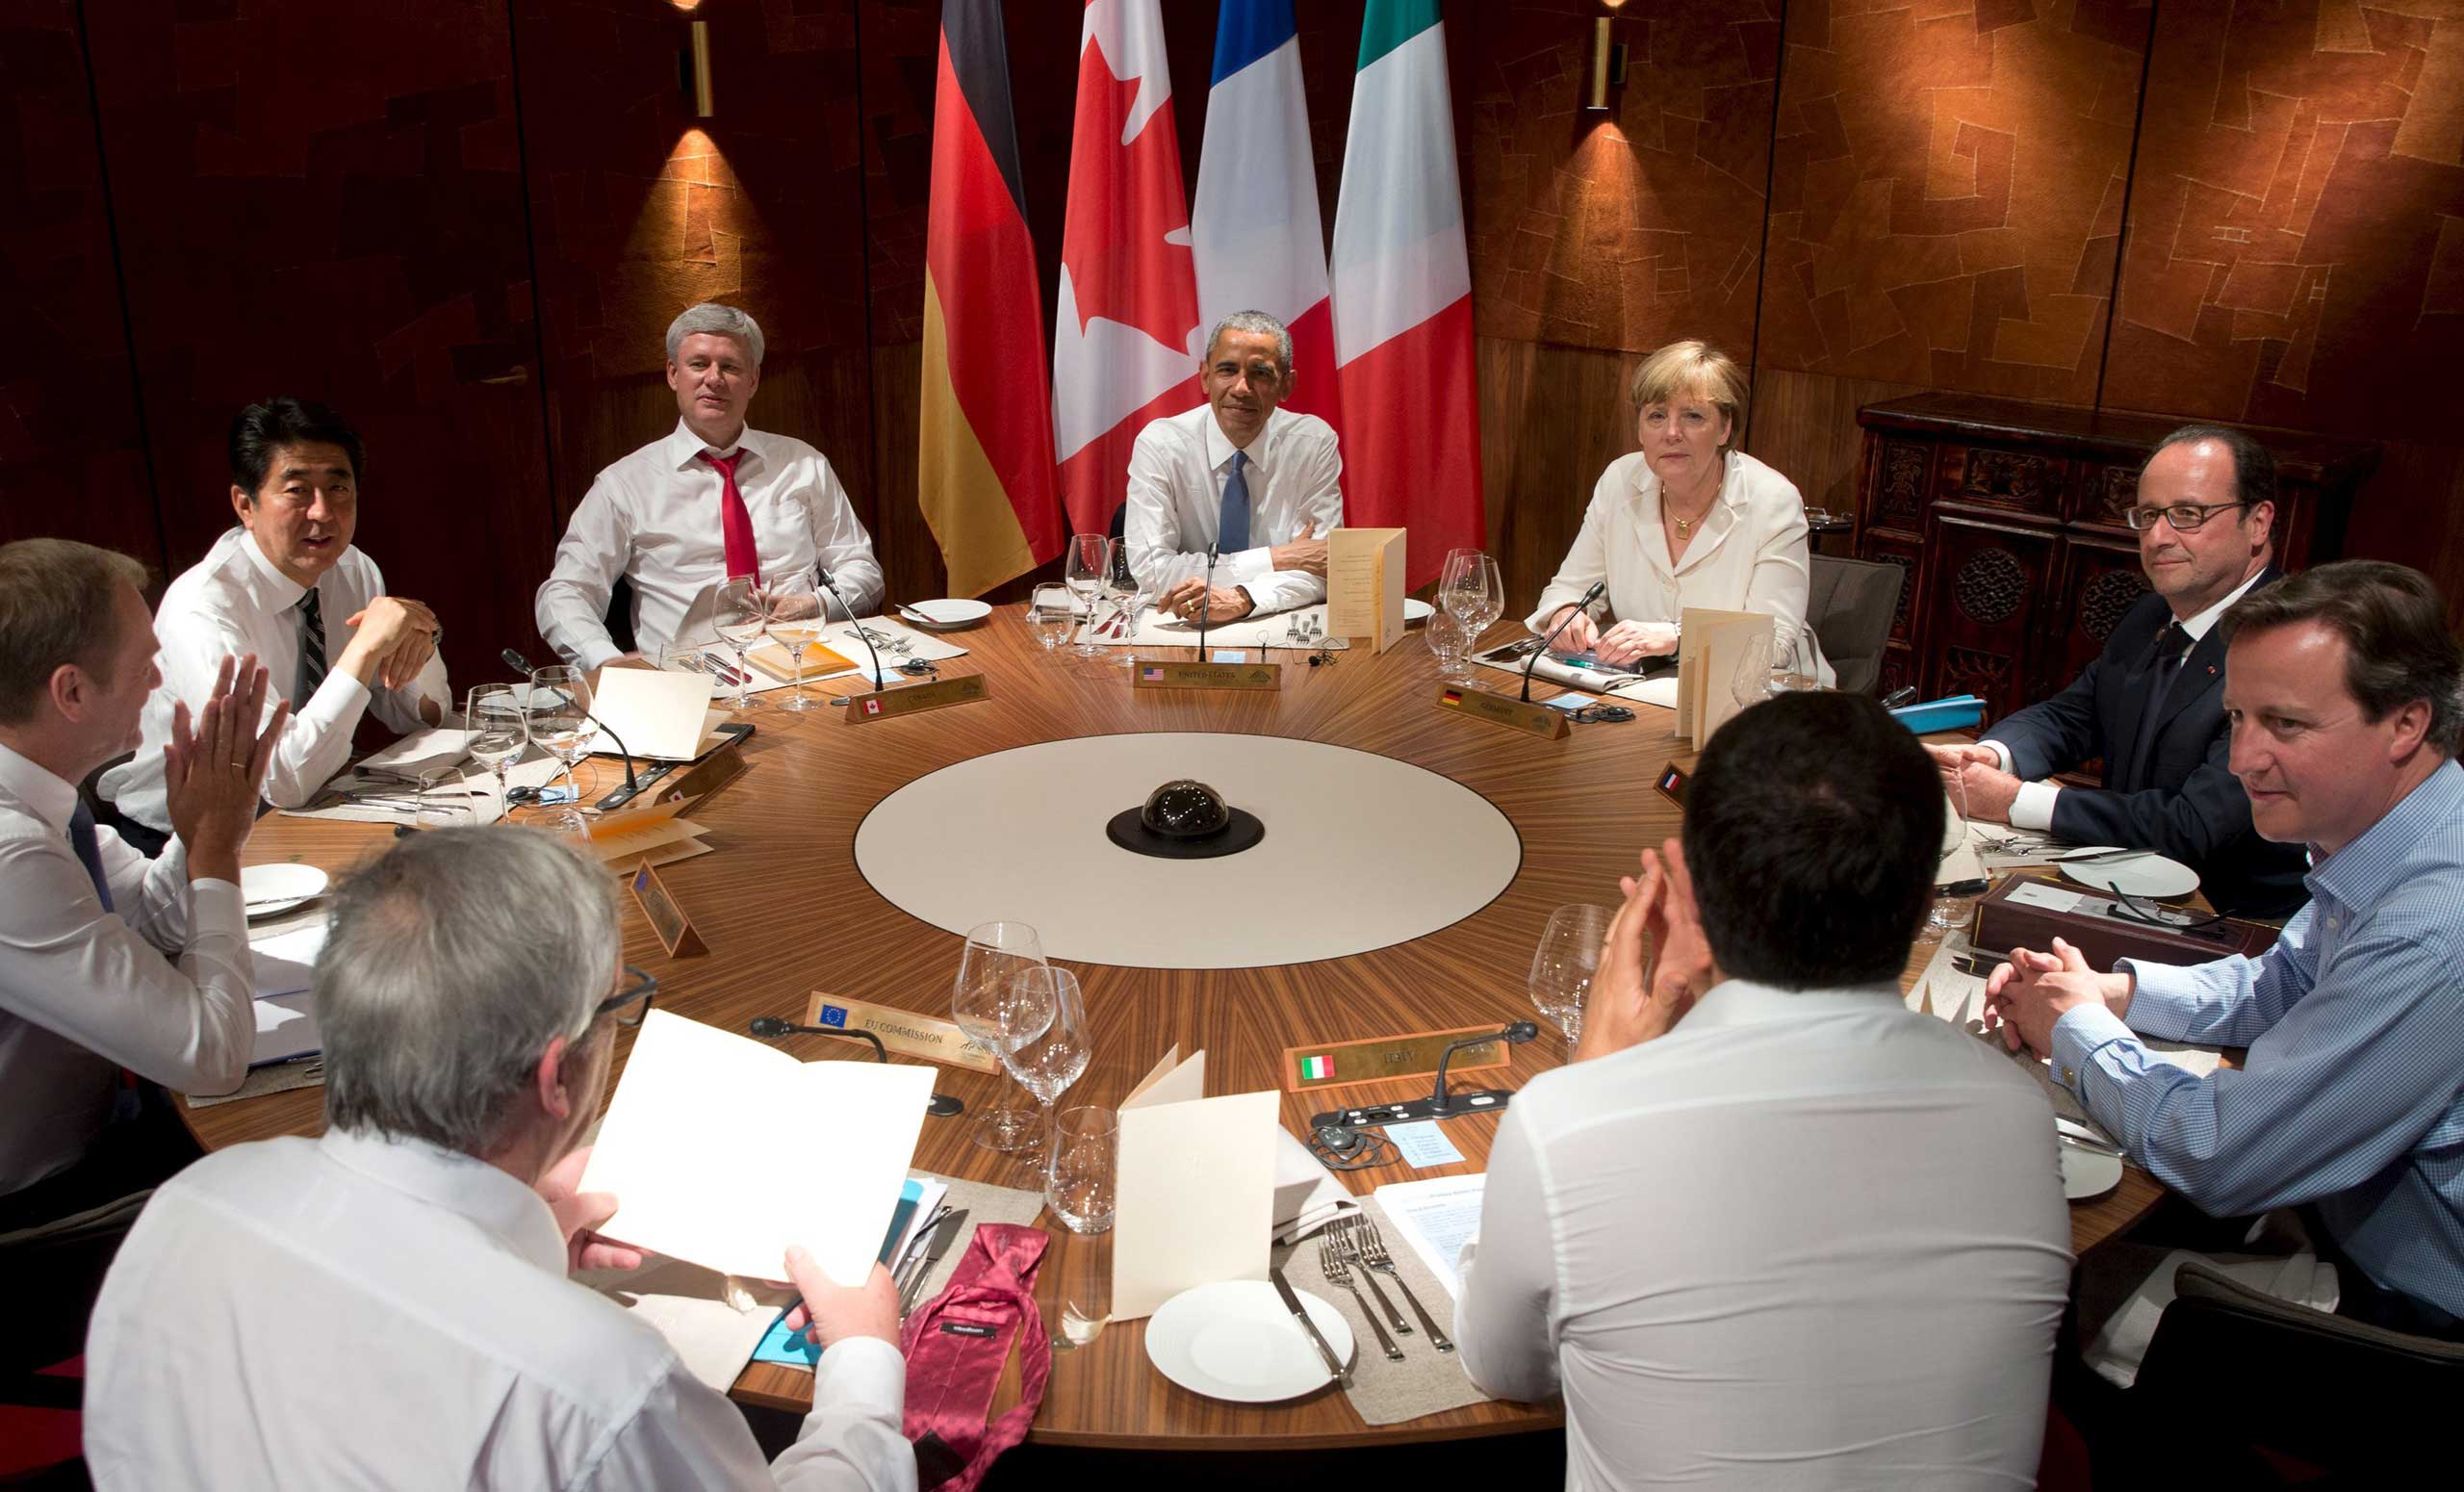 Leaders from the Group of Seven (G7) industrial nations hold a working dinner in the Bavarian village of Kruen, Germany, on June 7, 2015. (Stephen Crowley—Reuters)